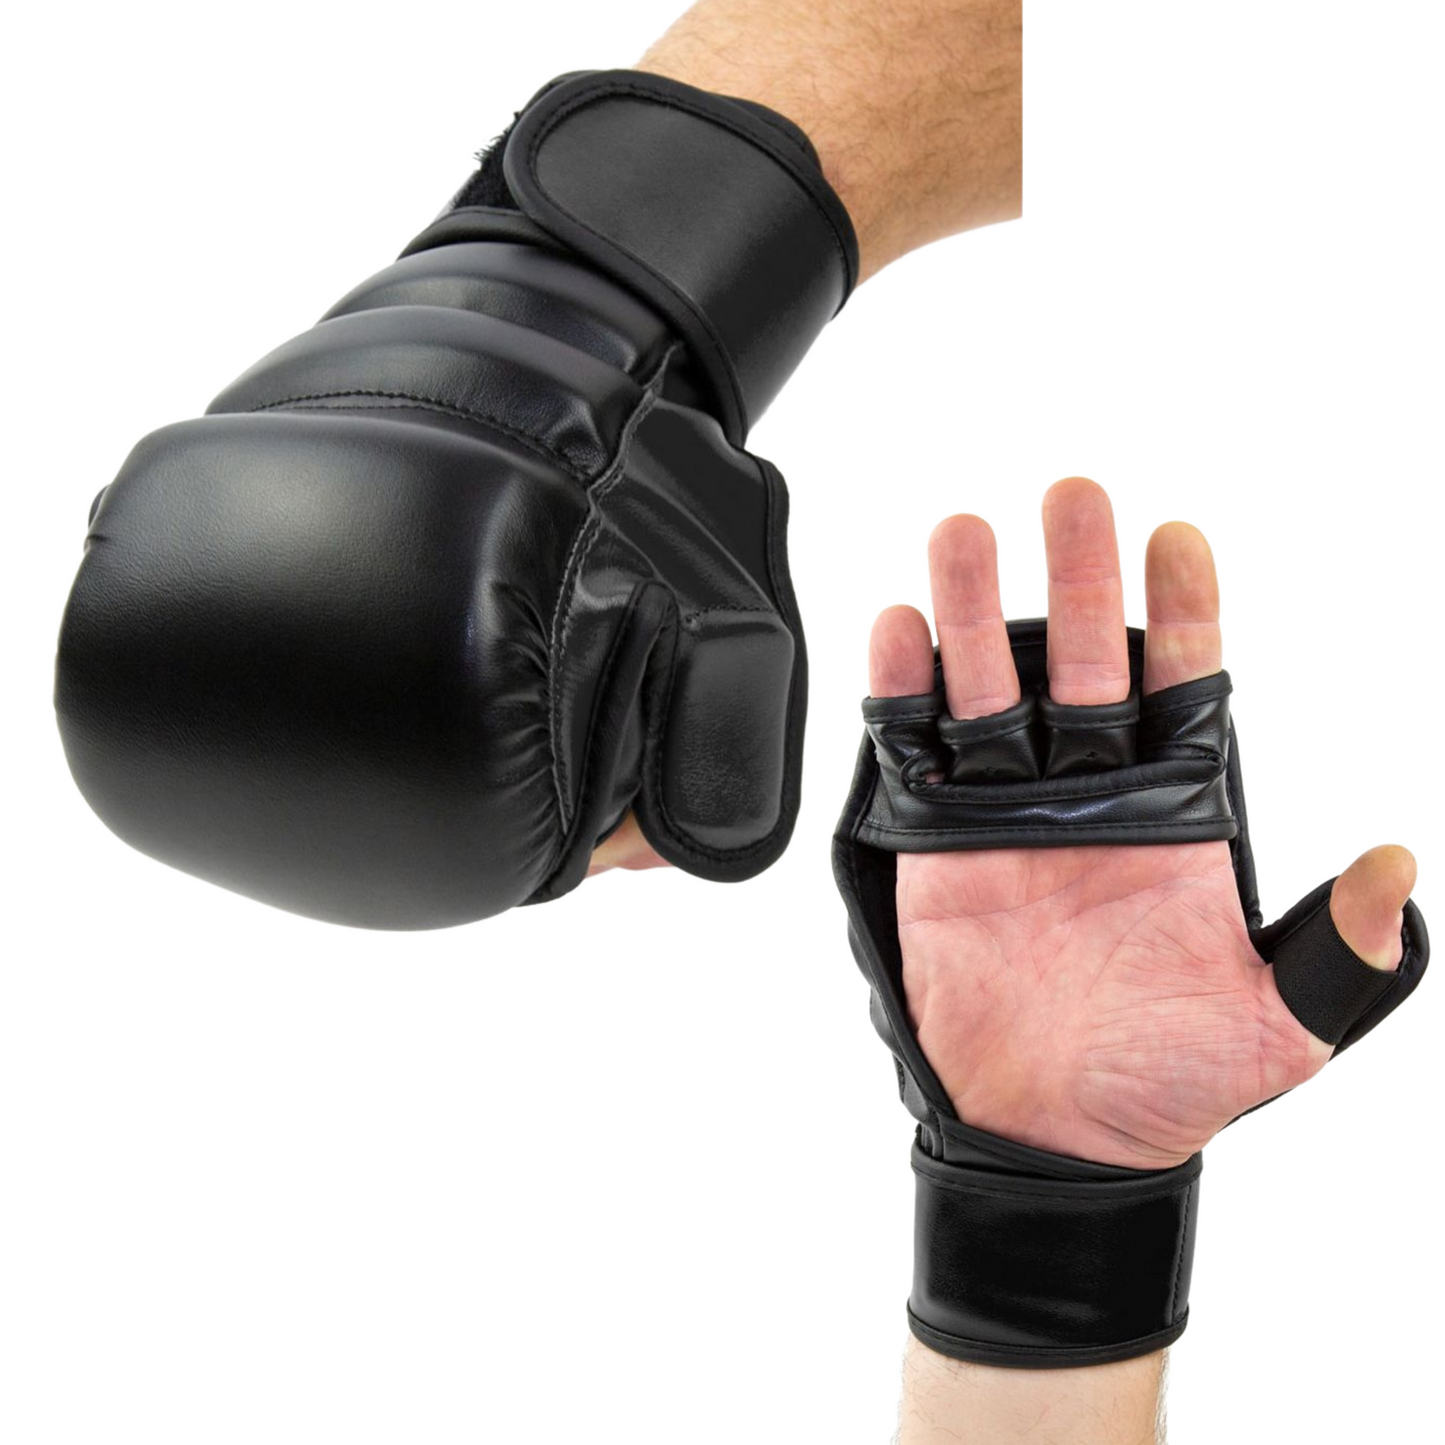 MMA Gloves, Hybrid Open Palm Shooter fighting MMA gloves Men Women, Double Wrap Wrist Support, Cage Fighting Combat Sports, Muay Thai, Punching Bag kickboxing gloves